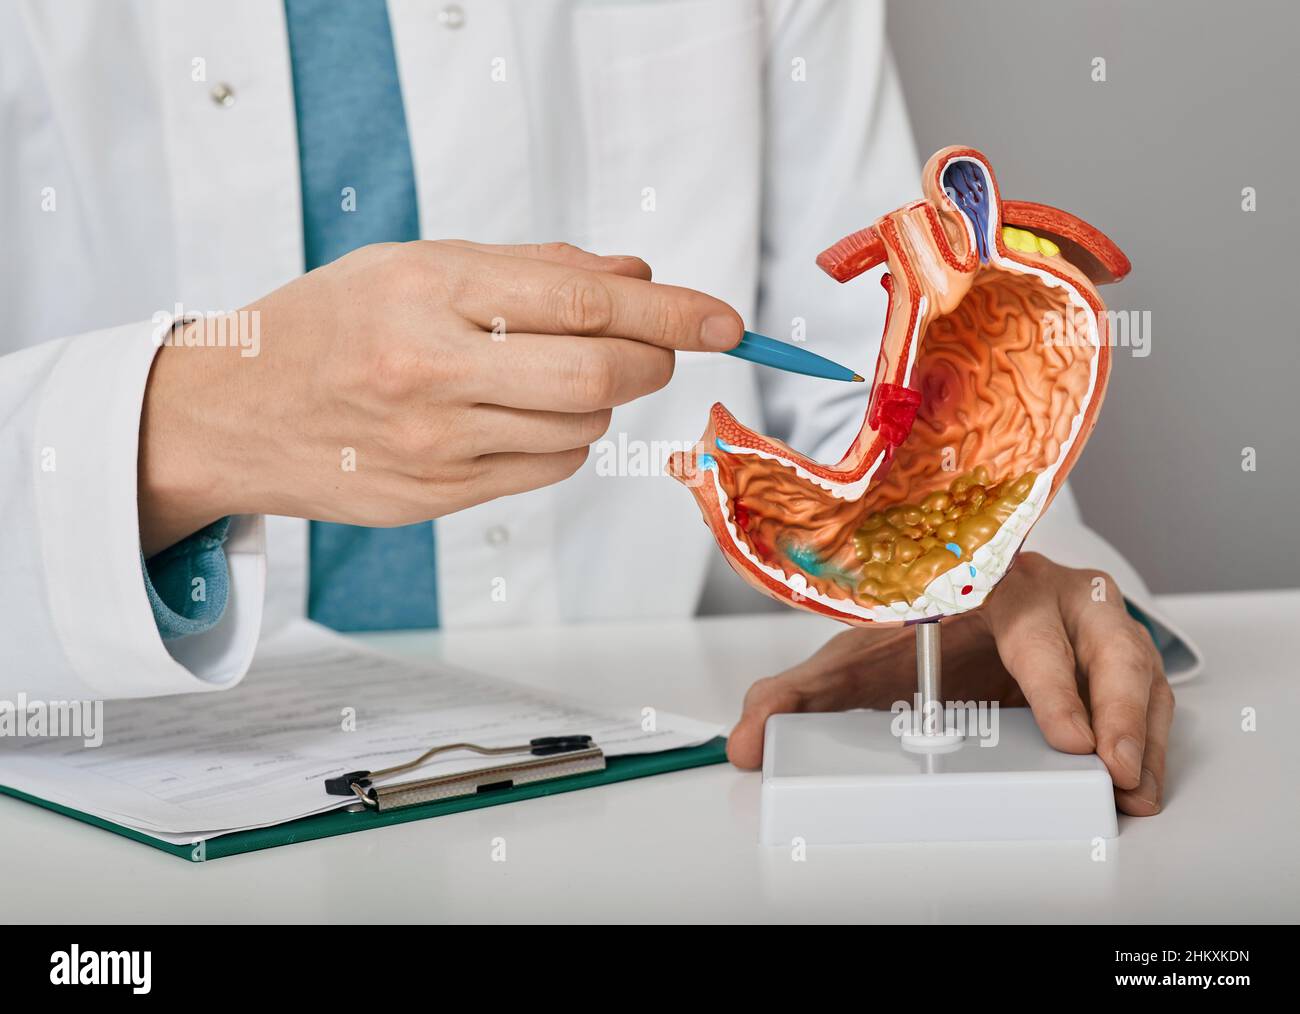 Gastroenterologist consultation, treatment of stomach diseases and ulcers. doctor pointing to gastric ulcer on anatomical model of stomach Stock Photo